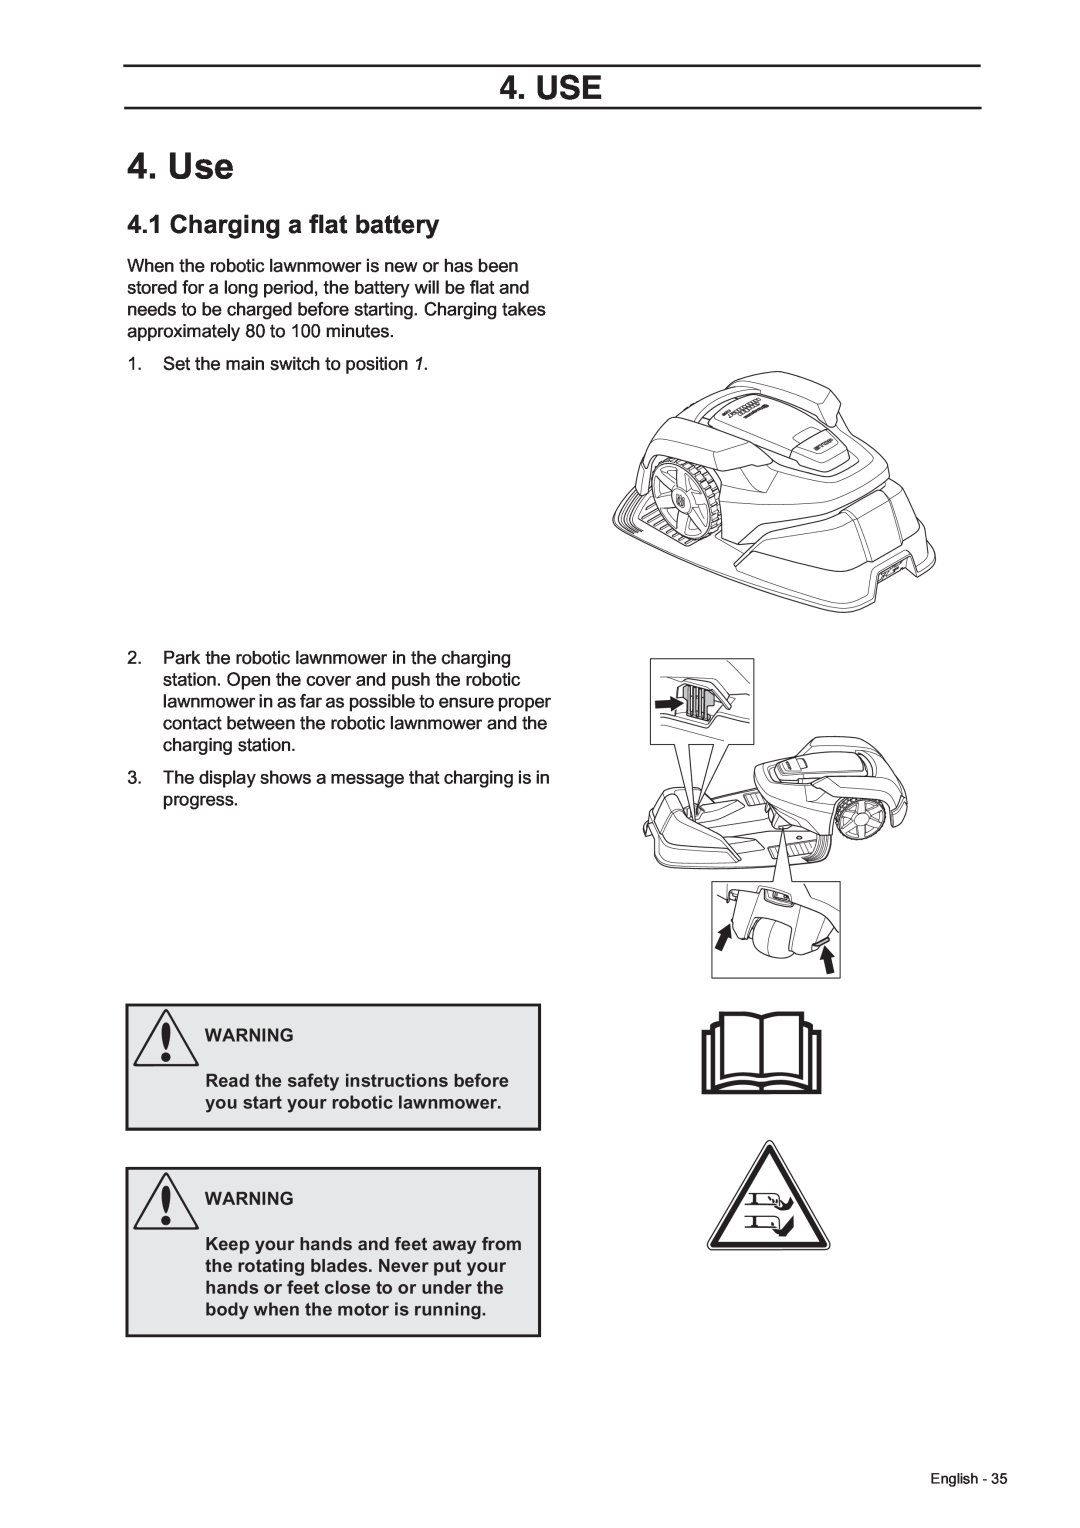 Husqvarna 305, 308 manual Use, Charging a flat battery, Read the safety instructions before you start your robotic lawnmower 